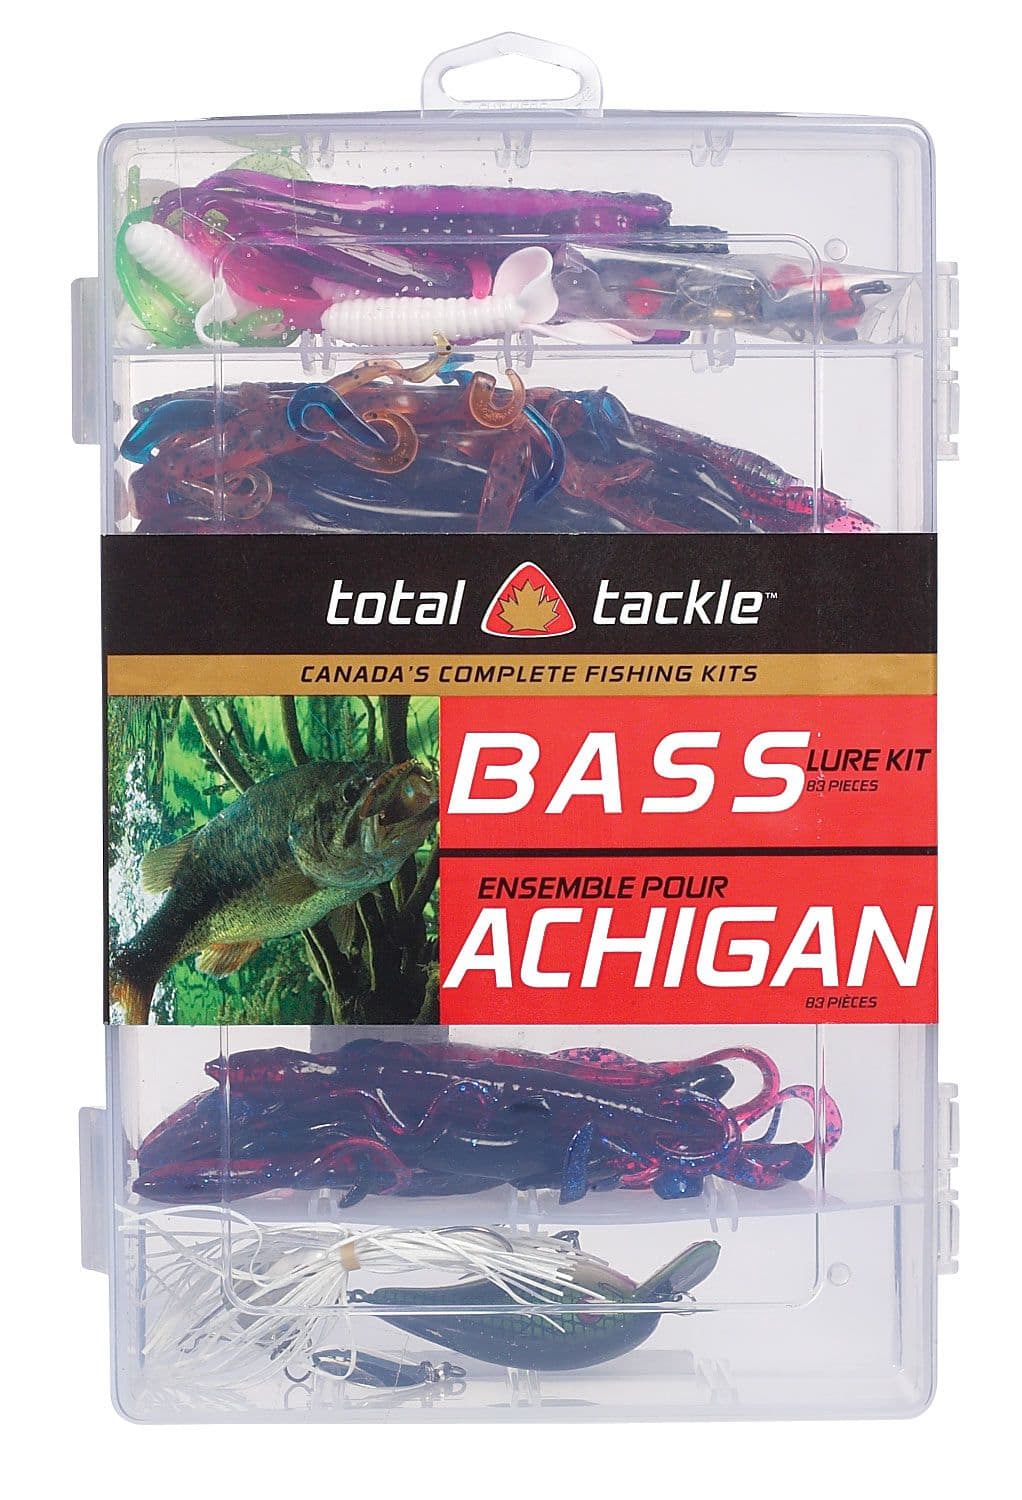 https://media-www.canadiantire.ca/product/playing/fishing/fishing-lures/0788776/total-tackle-bass-lure-kit-83-piece-b3174bea-39fd-48e5-a6be-01382775804c-jpgrendition.jpg